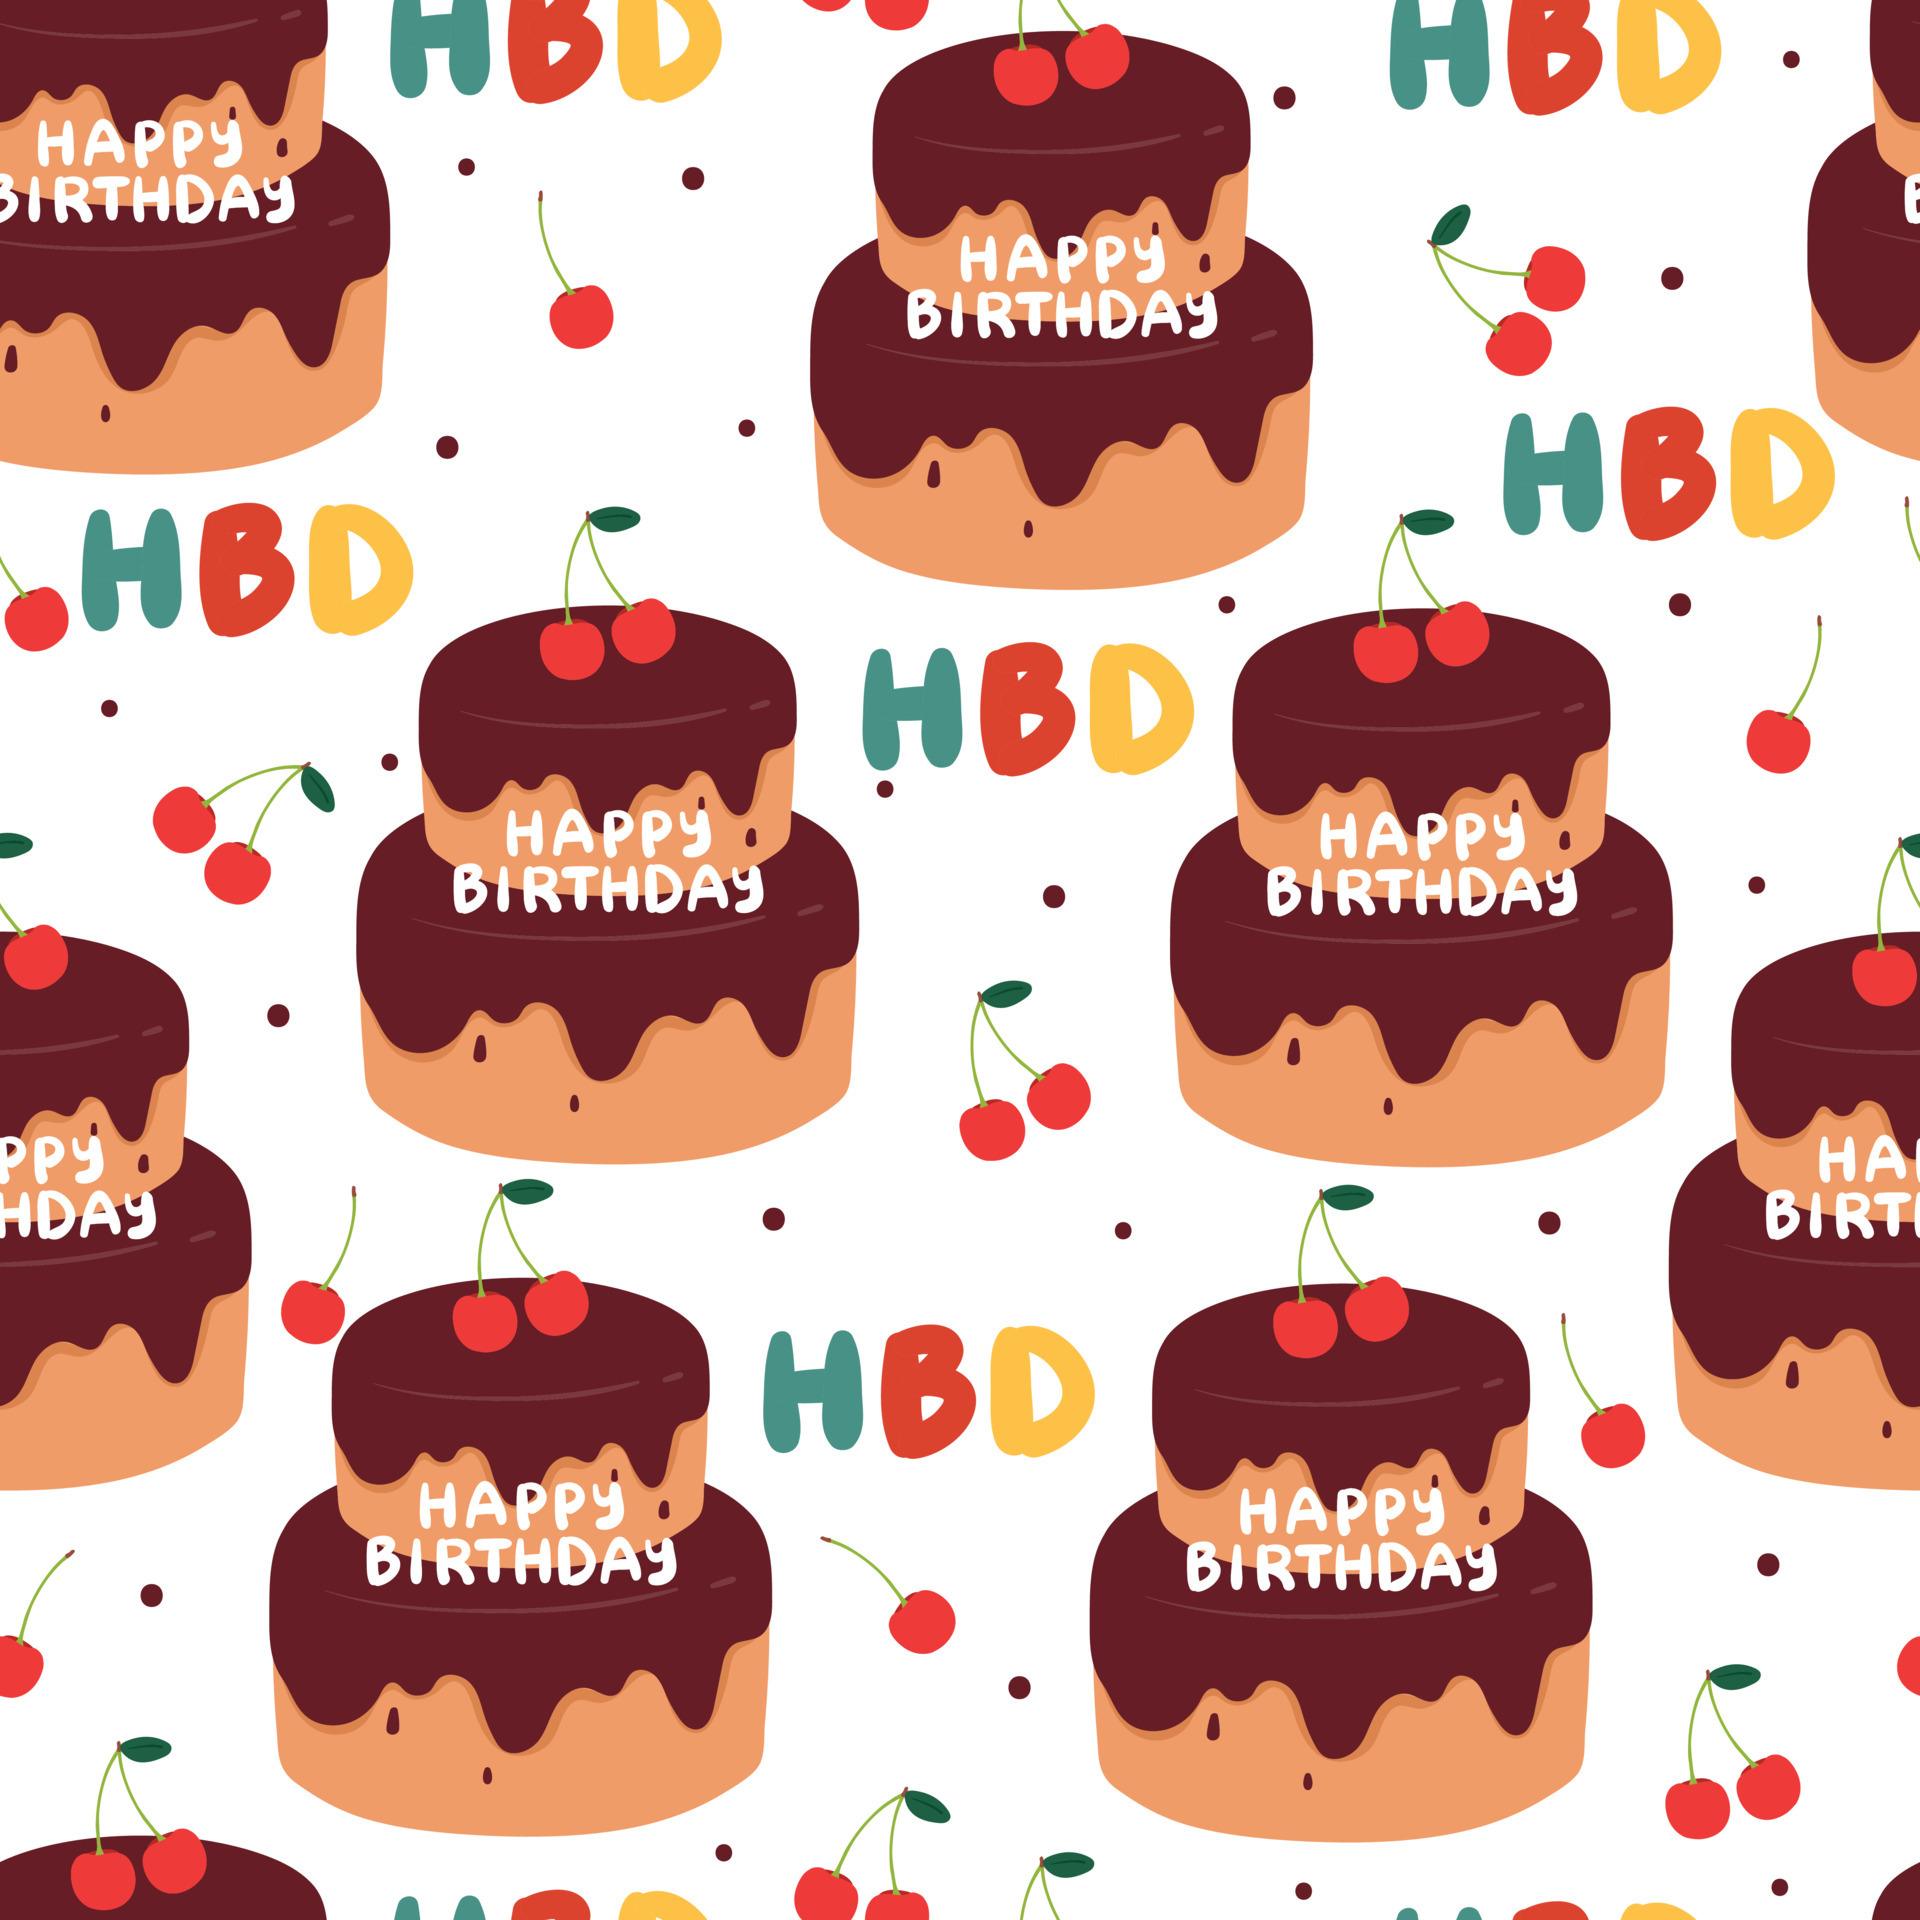 Birthday cake rounded fabric textured icon Vector Image